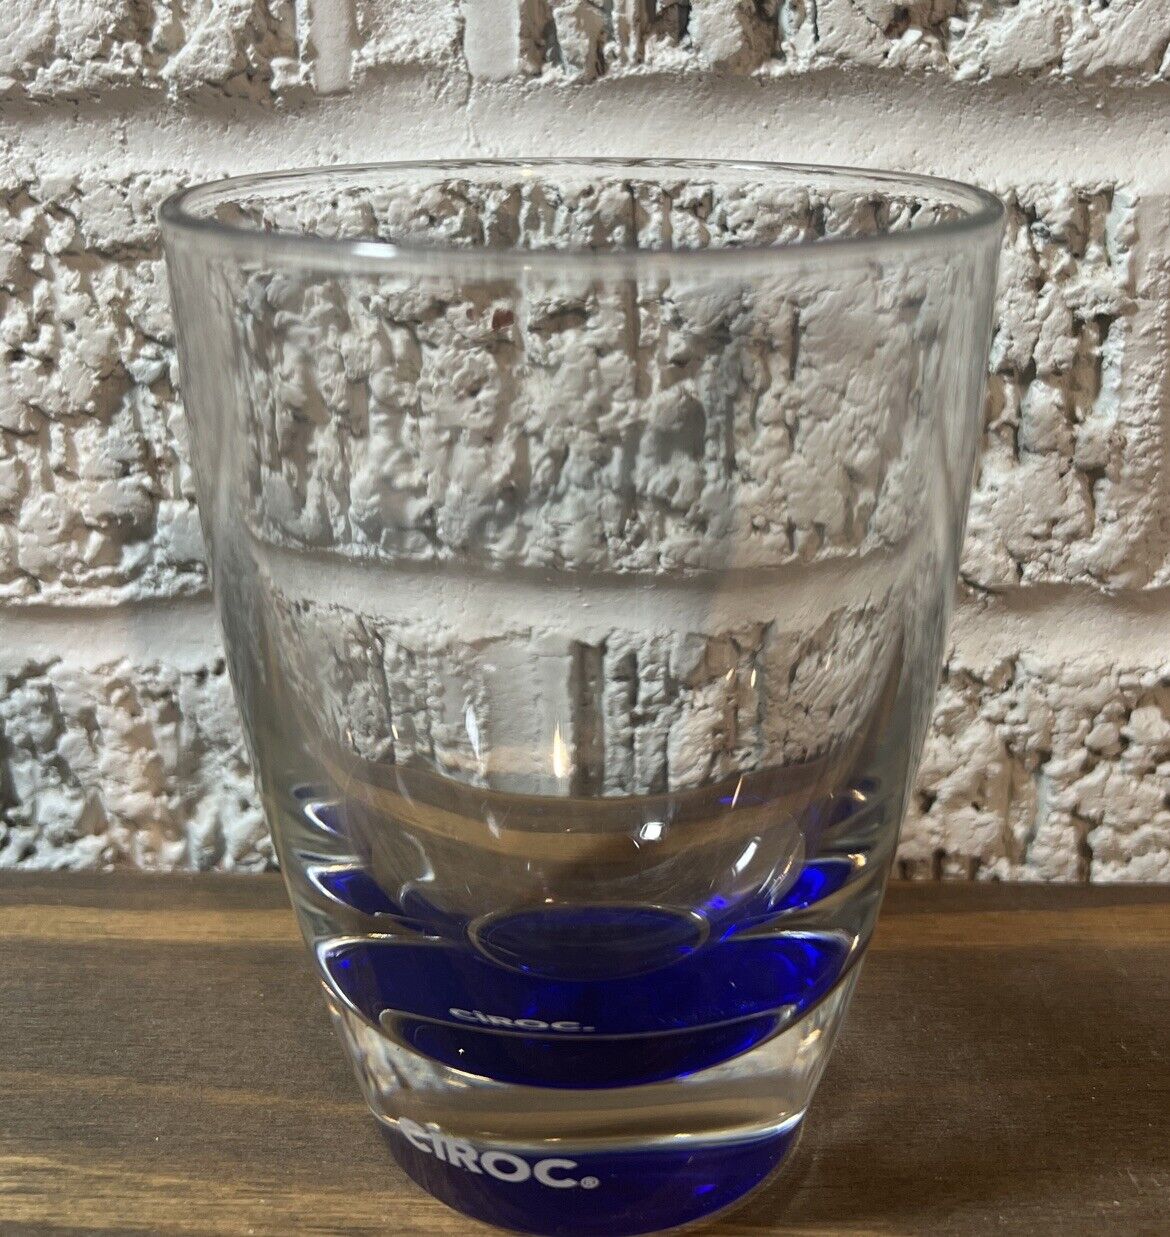 CIROC Weighted 4”x3” Vodka Rocks Glass made in ItaThick Cobalt Blue Bottom Italy